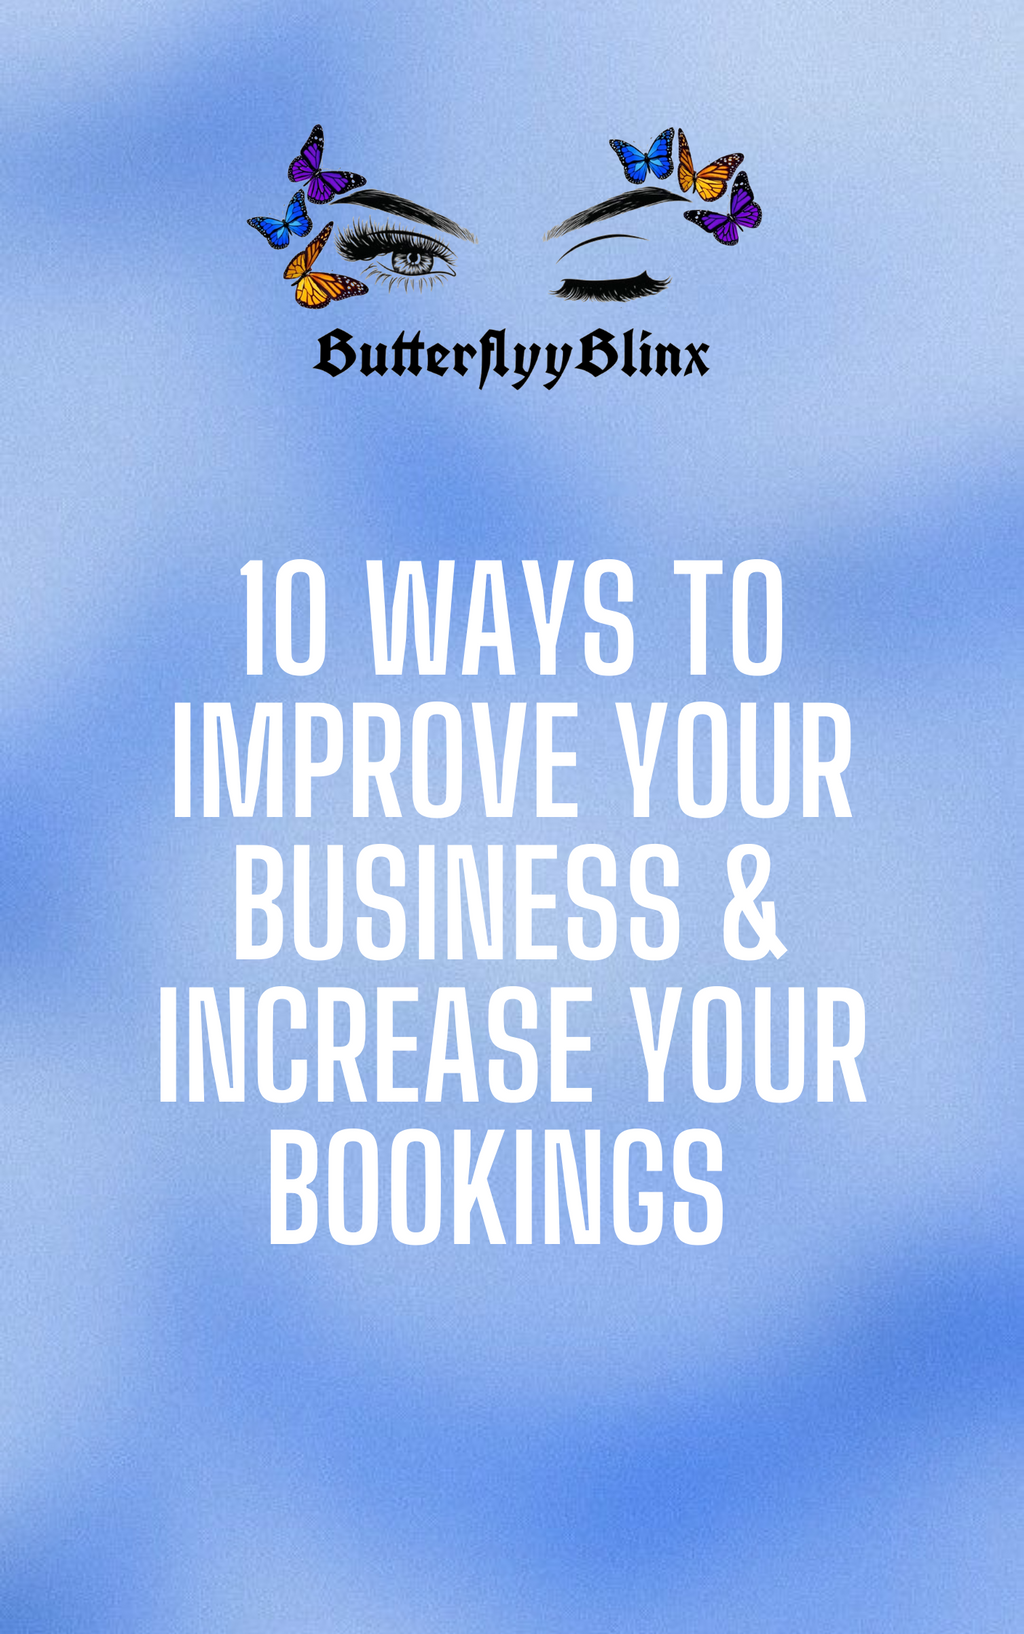 10 Ways to Improve Your Business & Increase Your Bookings